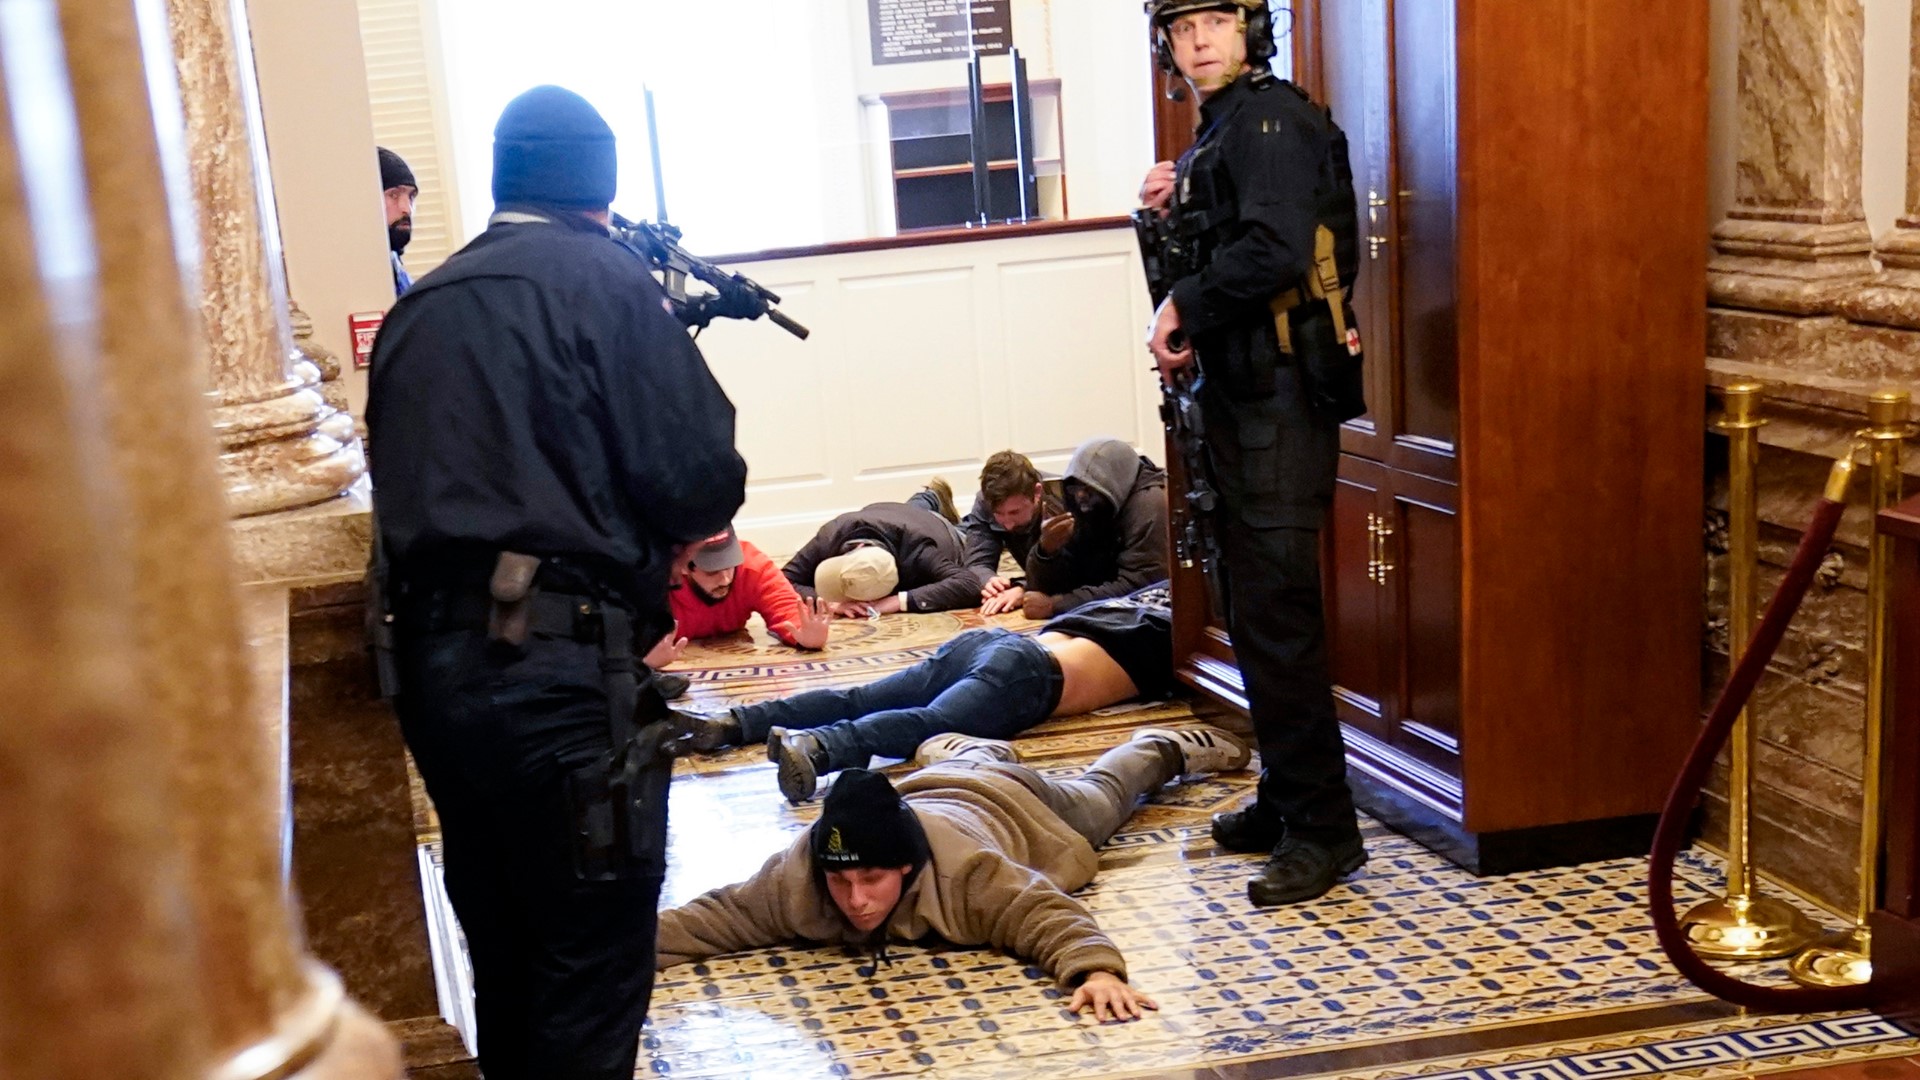 A pro-Trump mob overran the U.S. Capitol, occupying one hallowed space of American democracy after another. In the melee, one person was shot and killed.